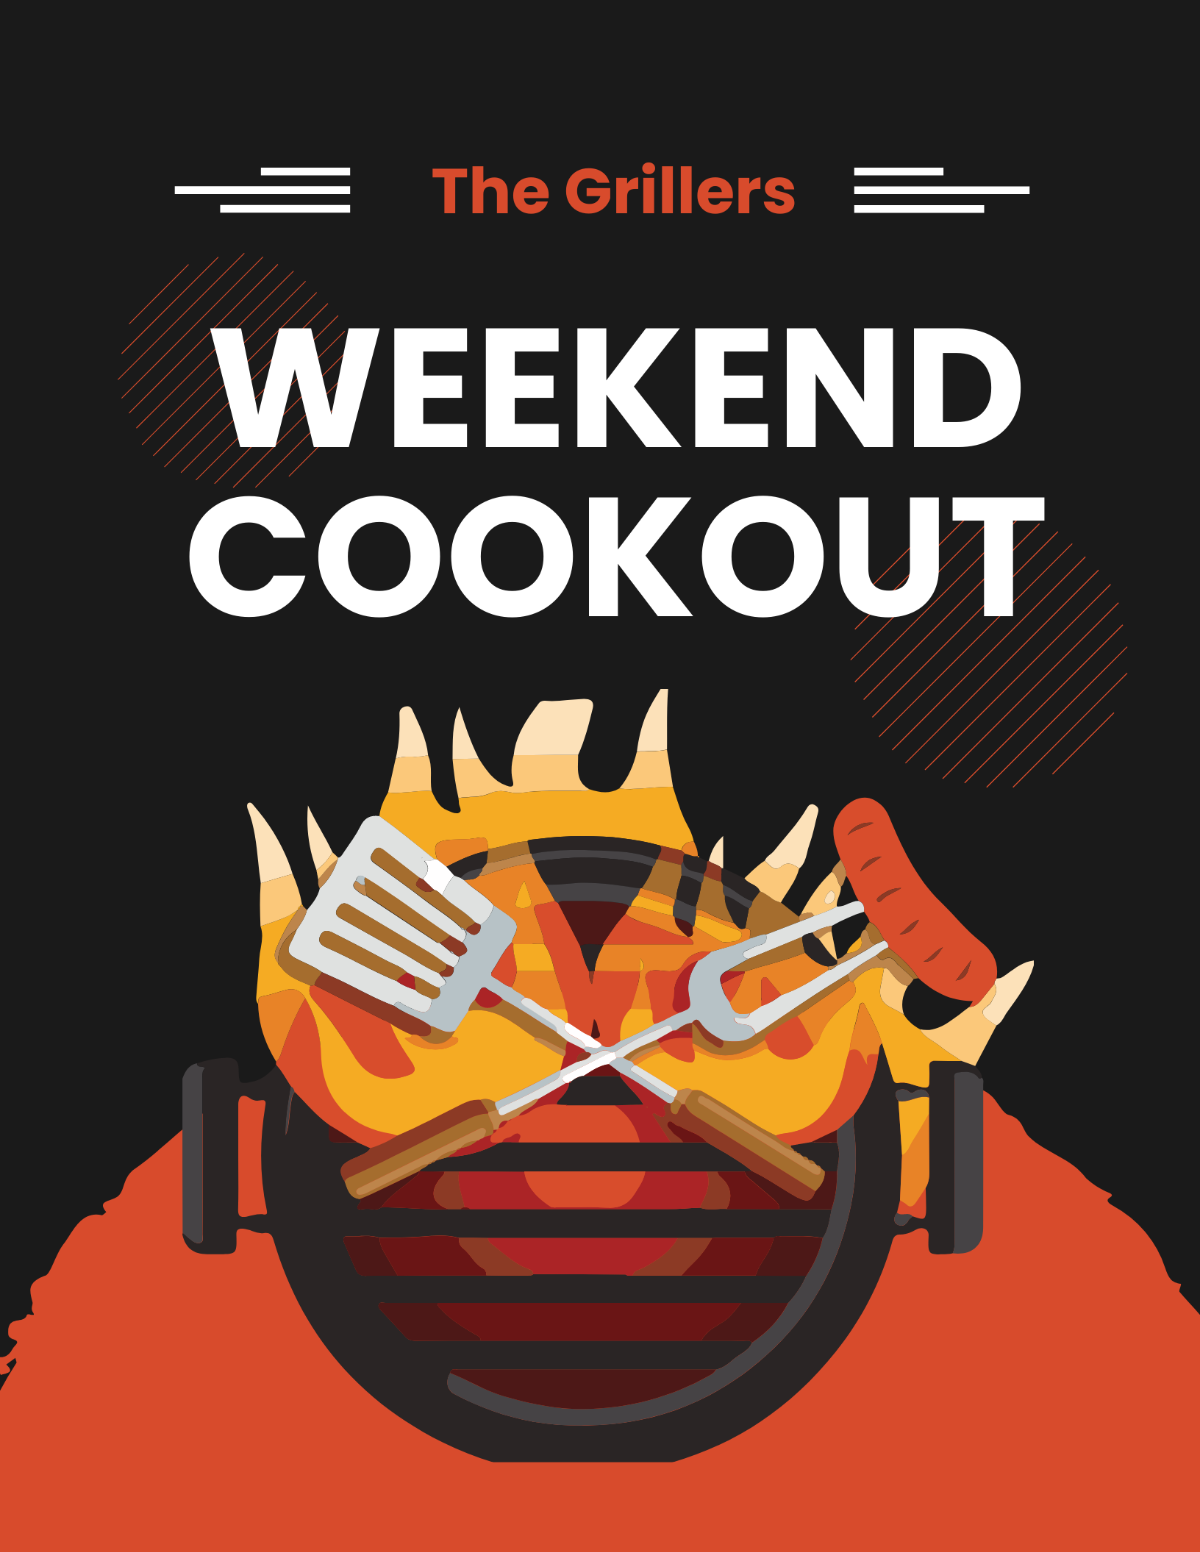 Weekend Cookout Flyer Template